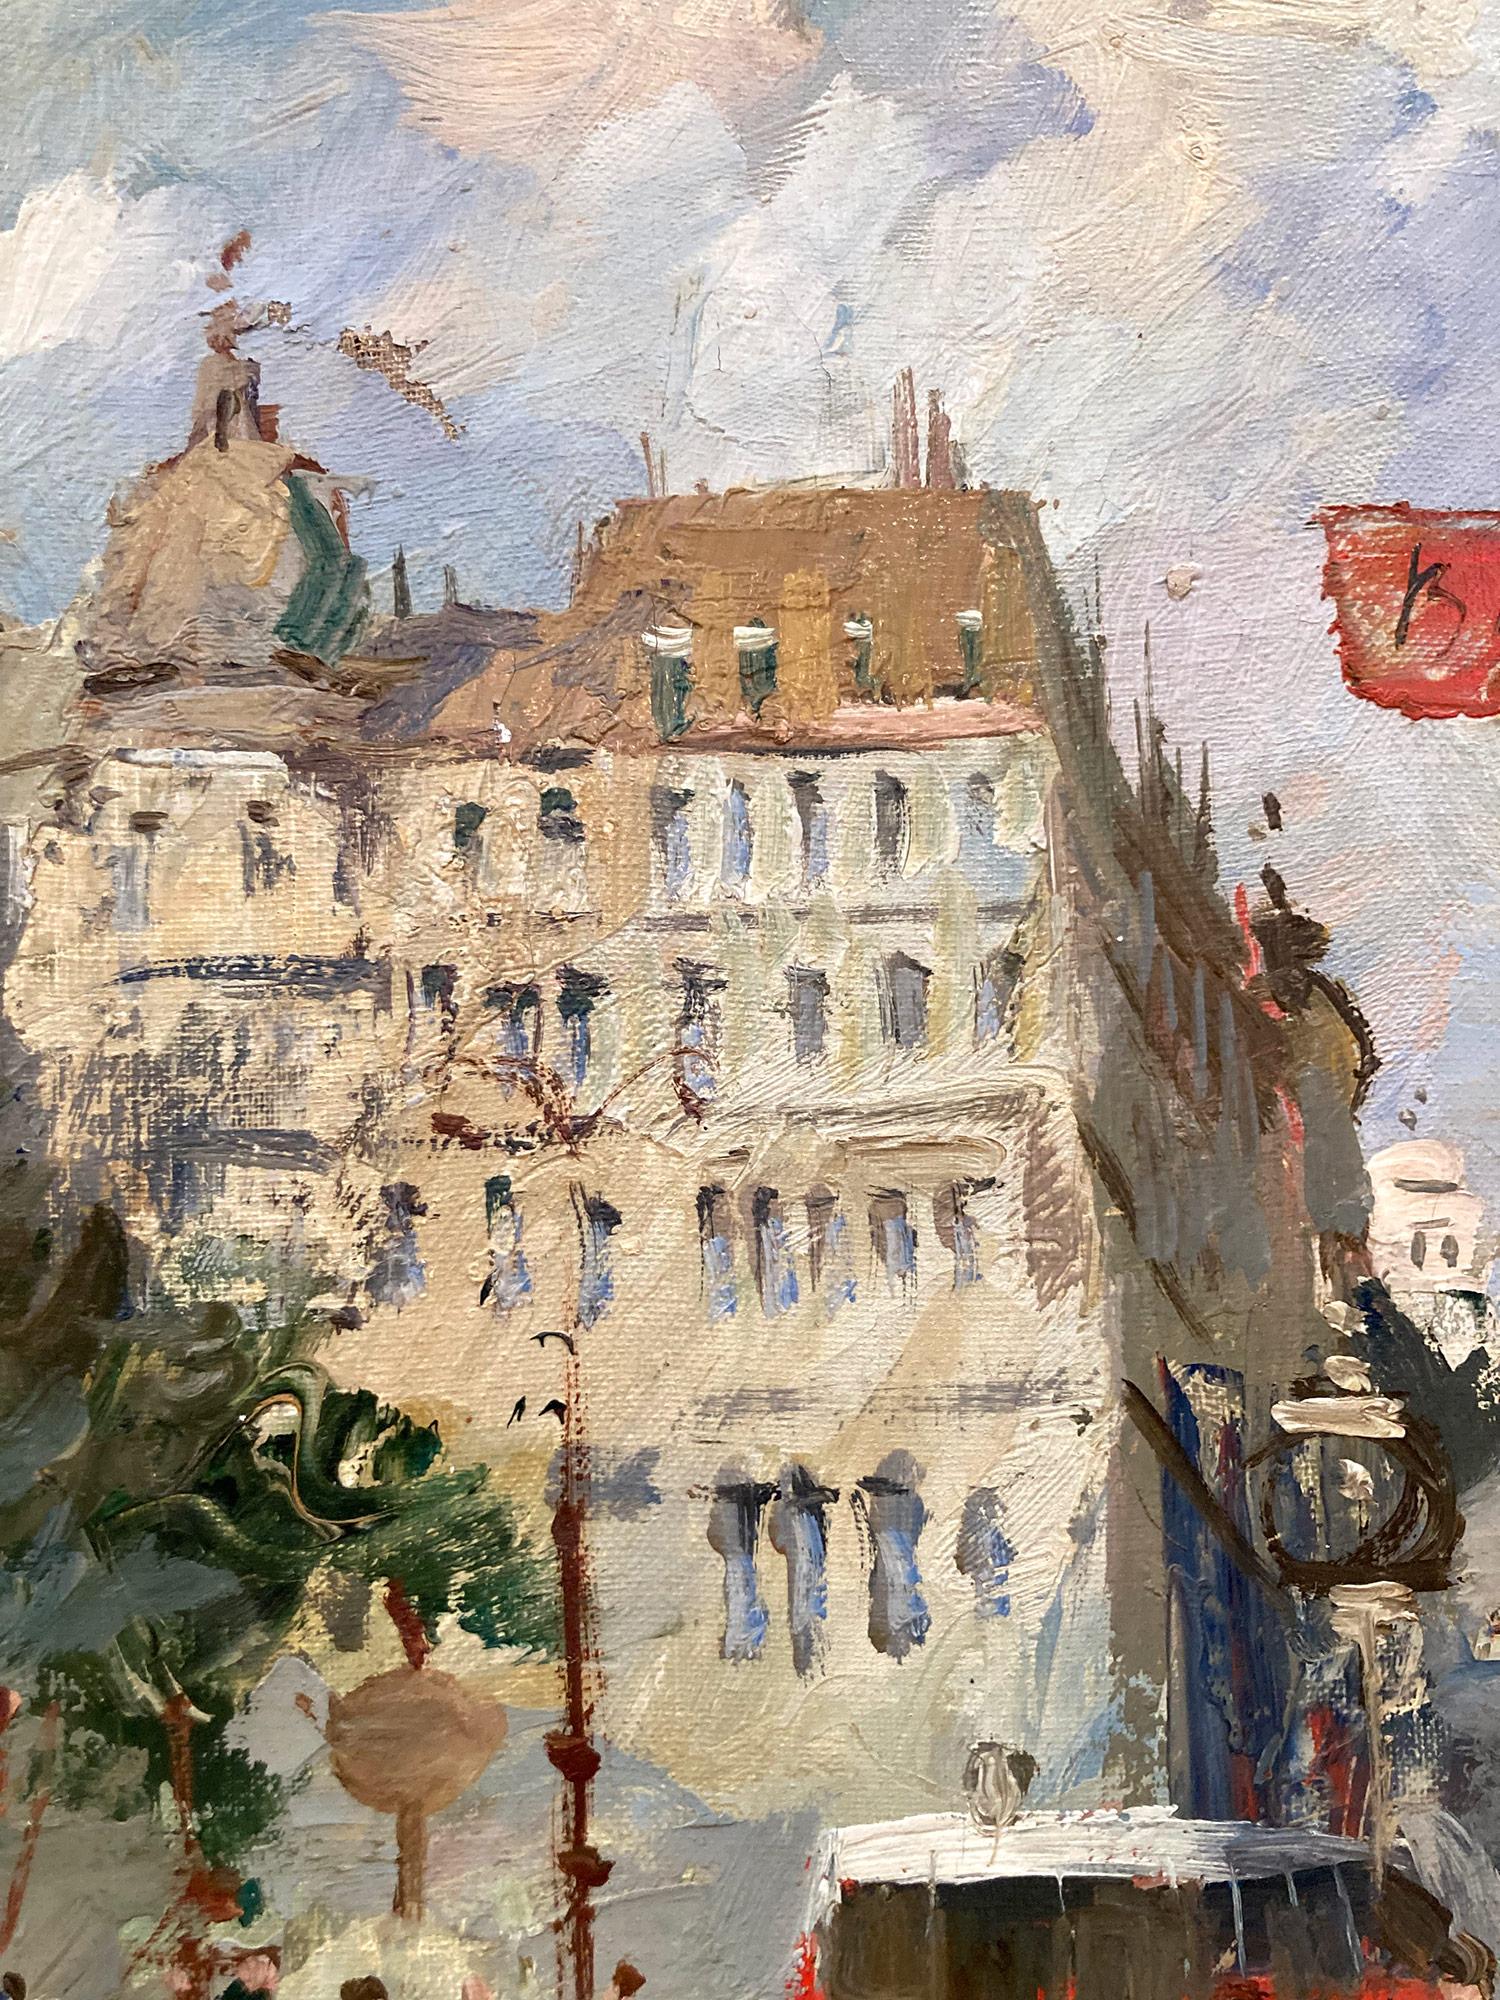 A beautiful oil on canvas painting by French artist, Anatol Bouchet. Bouchet was an French painter known for his colorful cityscapes depicting the times of his generation. This painting is a wonderful example of his work from the prime of his career